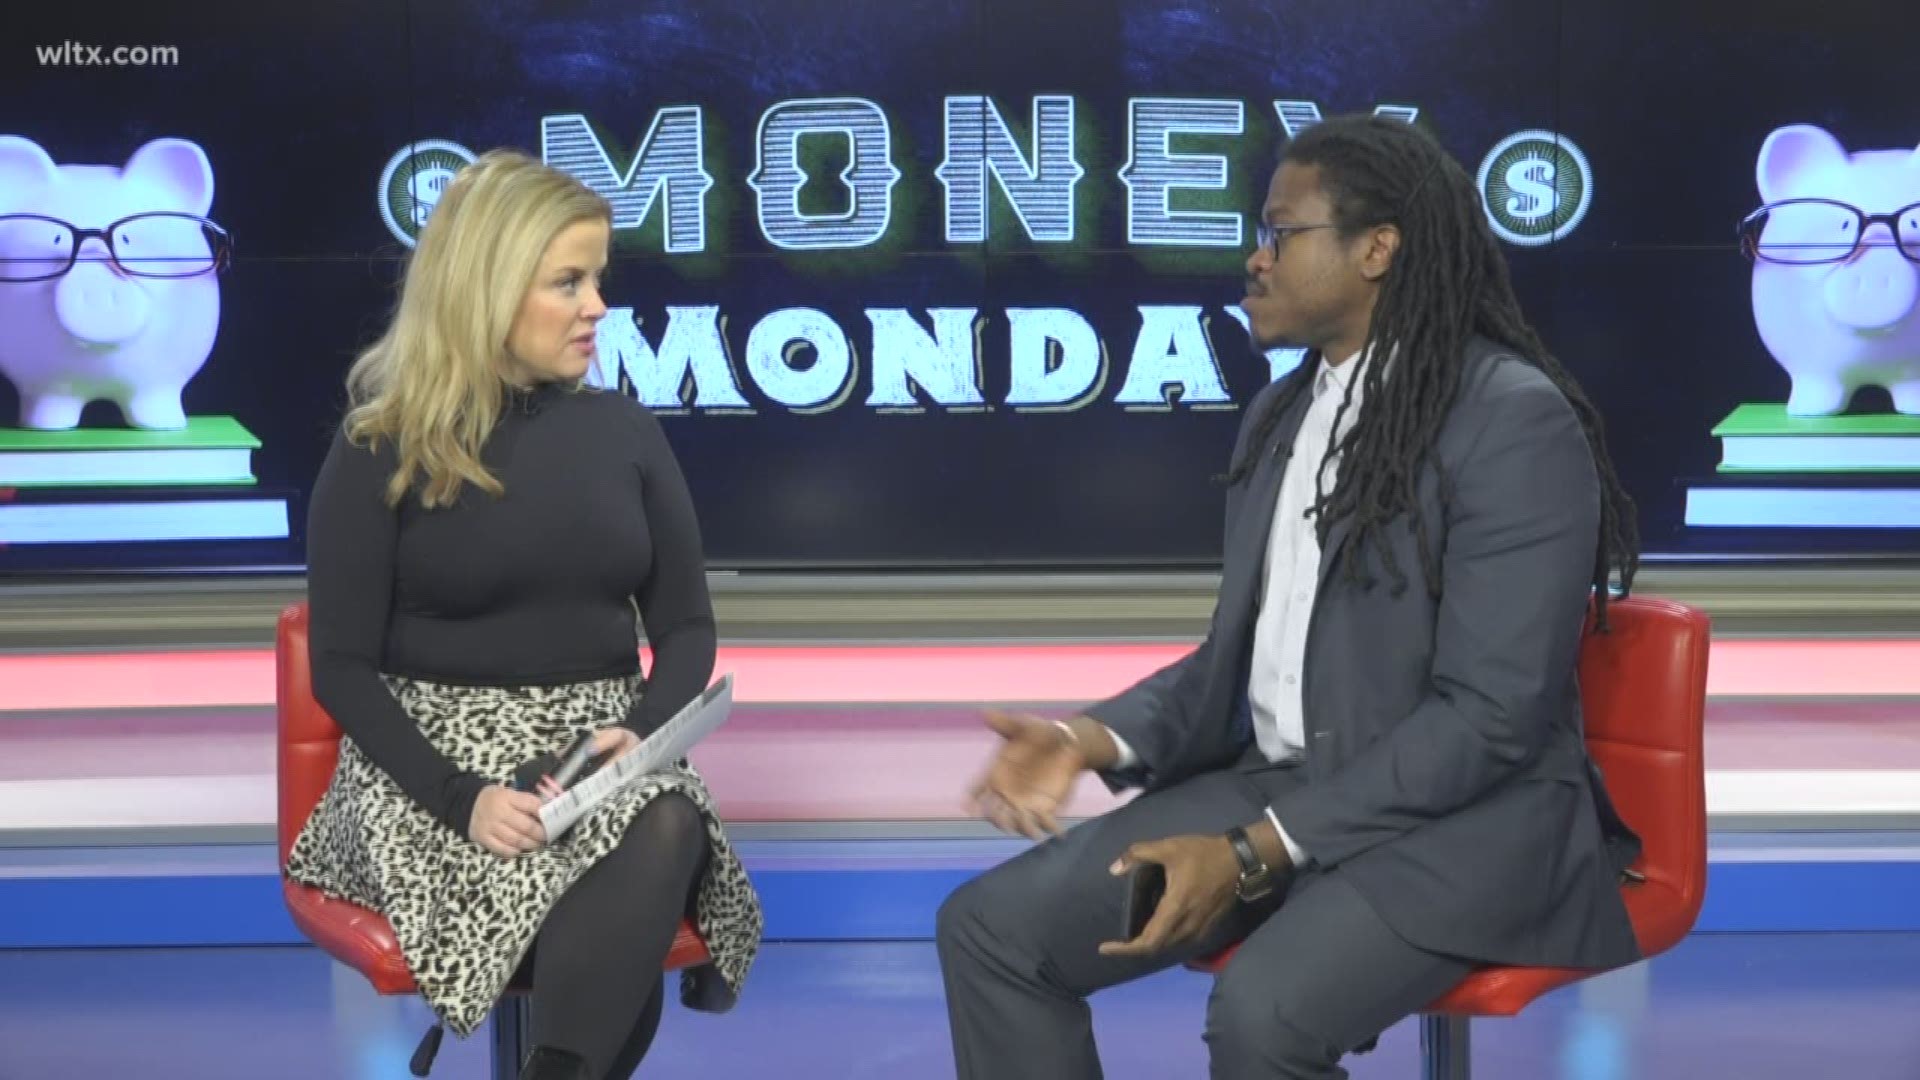 This week on Money Monday, Steven Hughes from Know Money Inc. brings us four ways we can make more money in the new year.